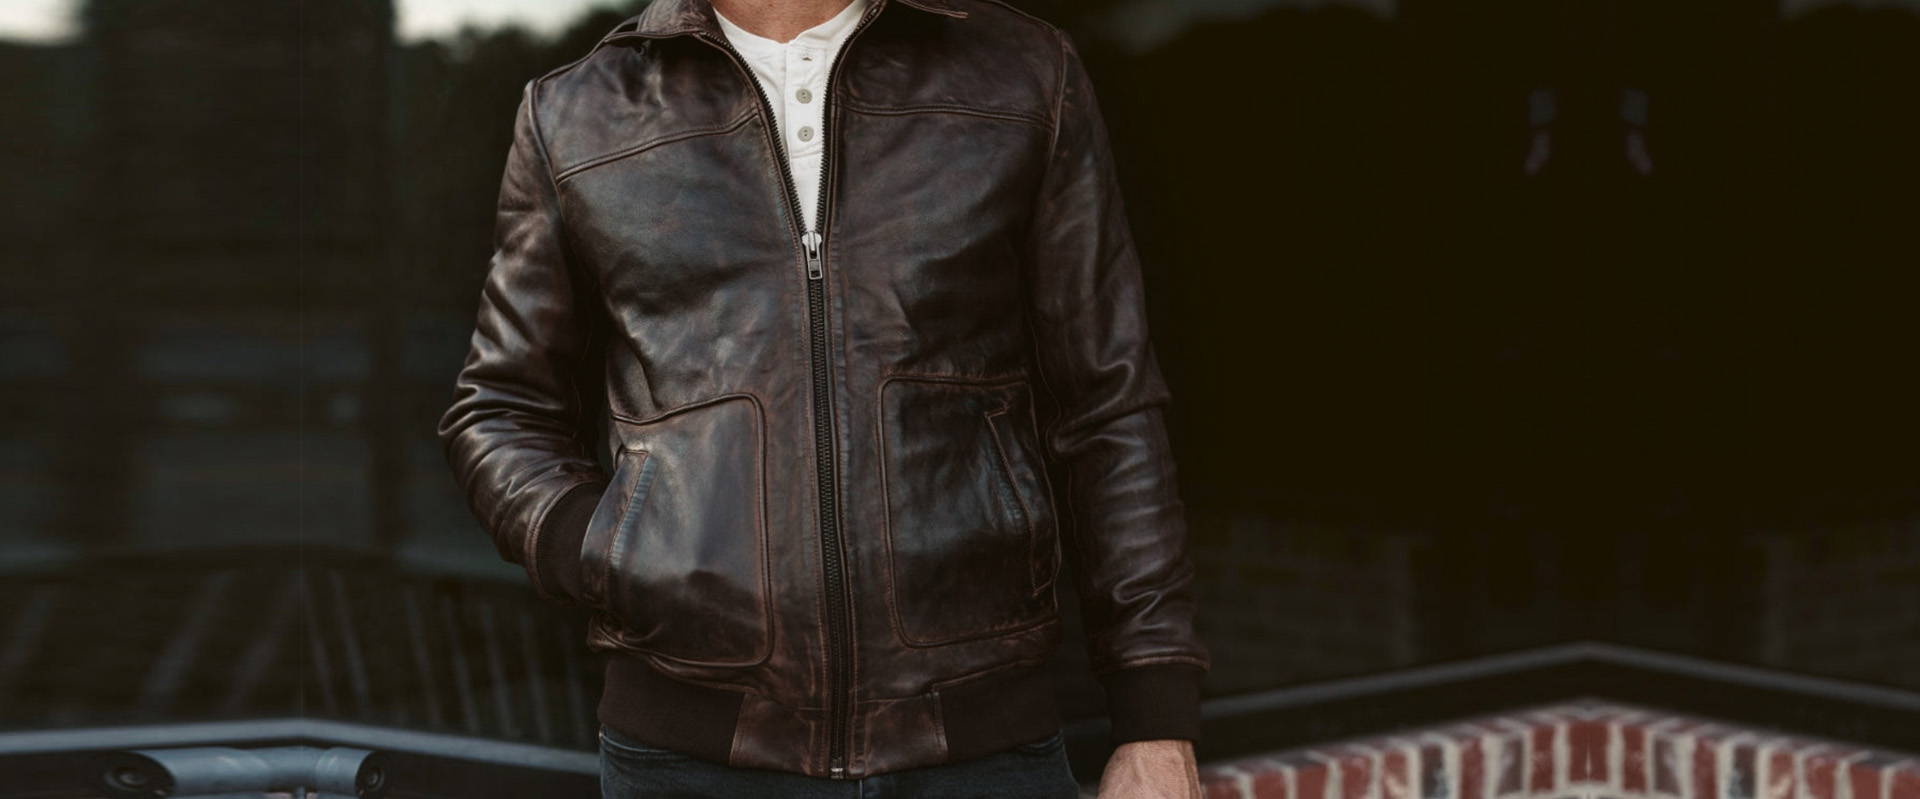 How Should a Leather Jacket Fit? Quick Guide | Buffalo Jackson